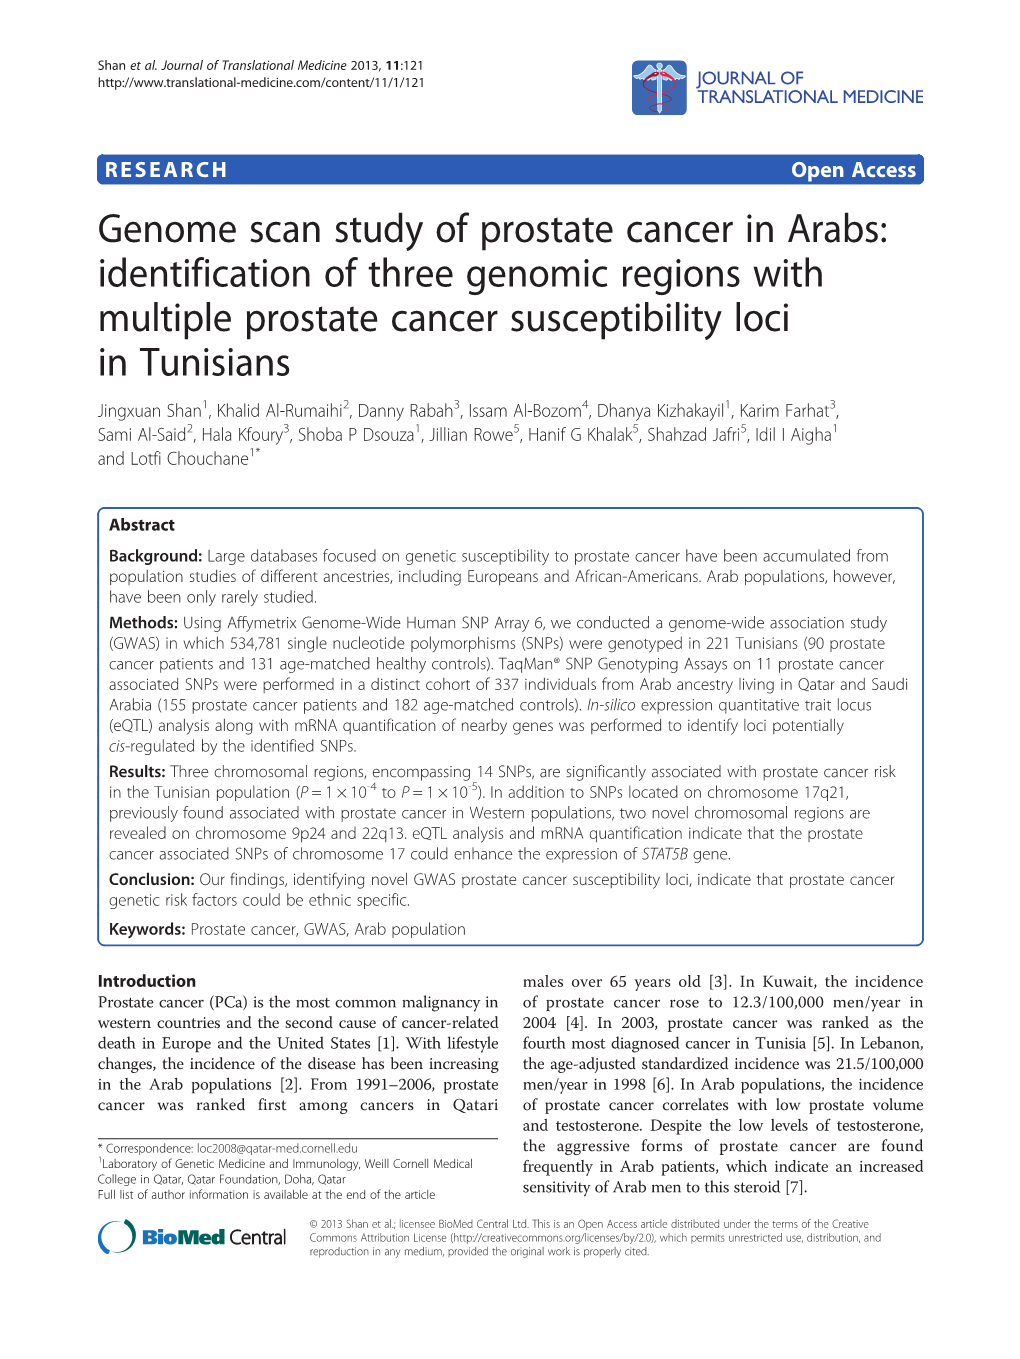 Genome Scan Study of Prostate Cancer in Arabs: Identification of Three